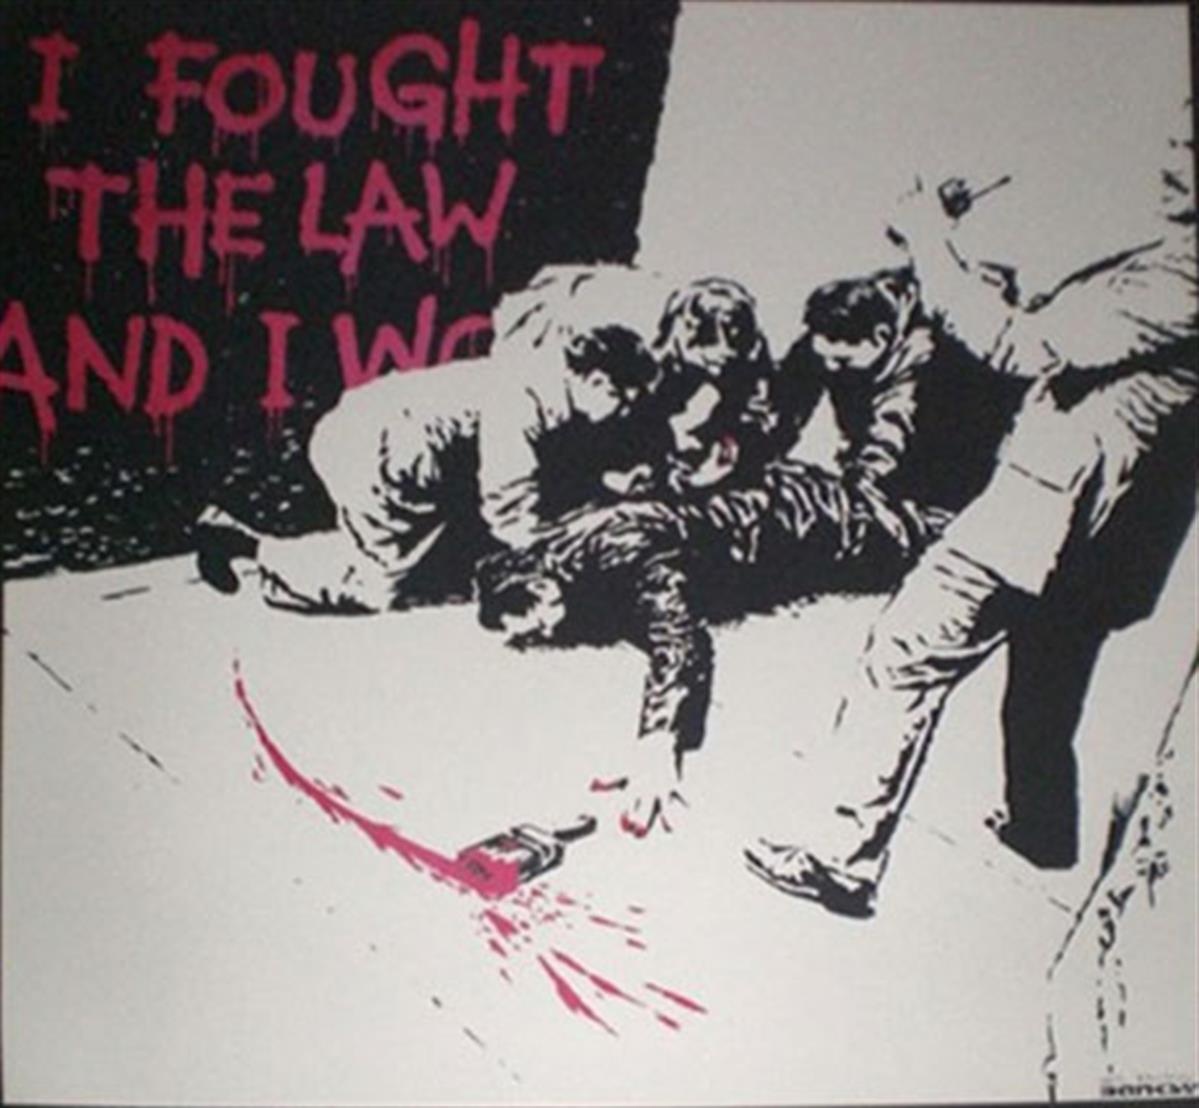 Banksy's 'I Fought The Law (Pink)'